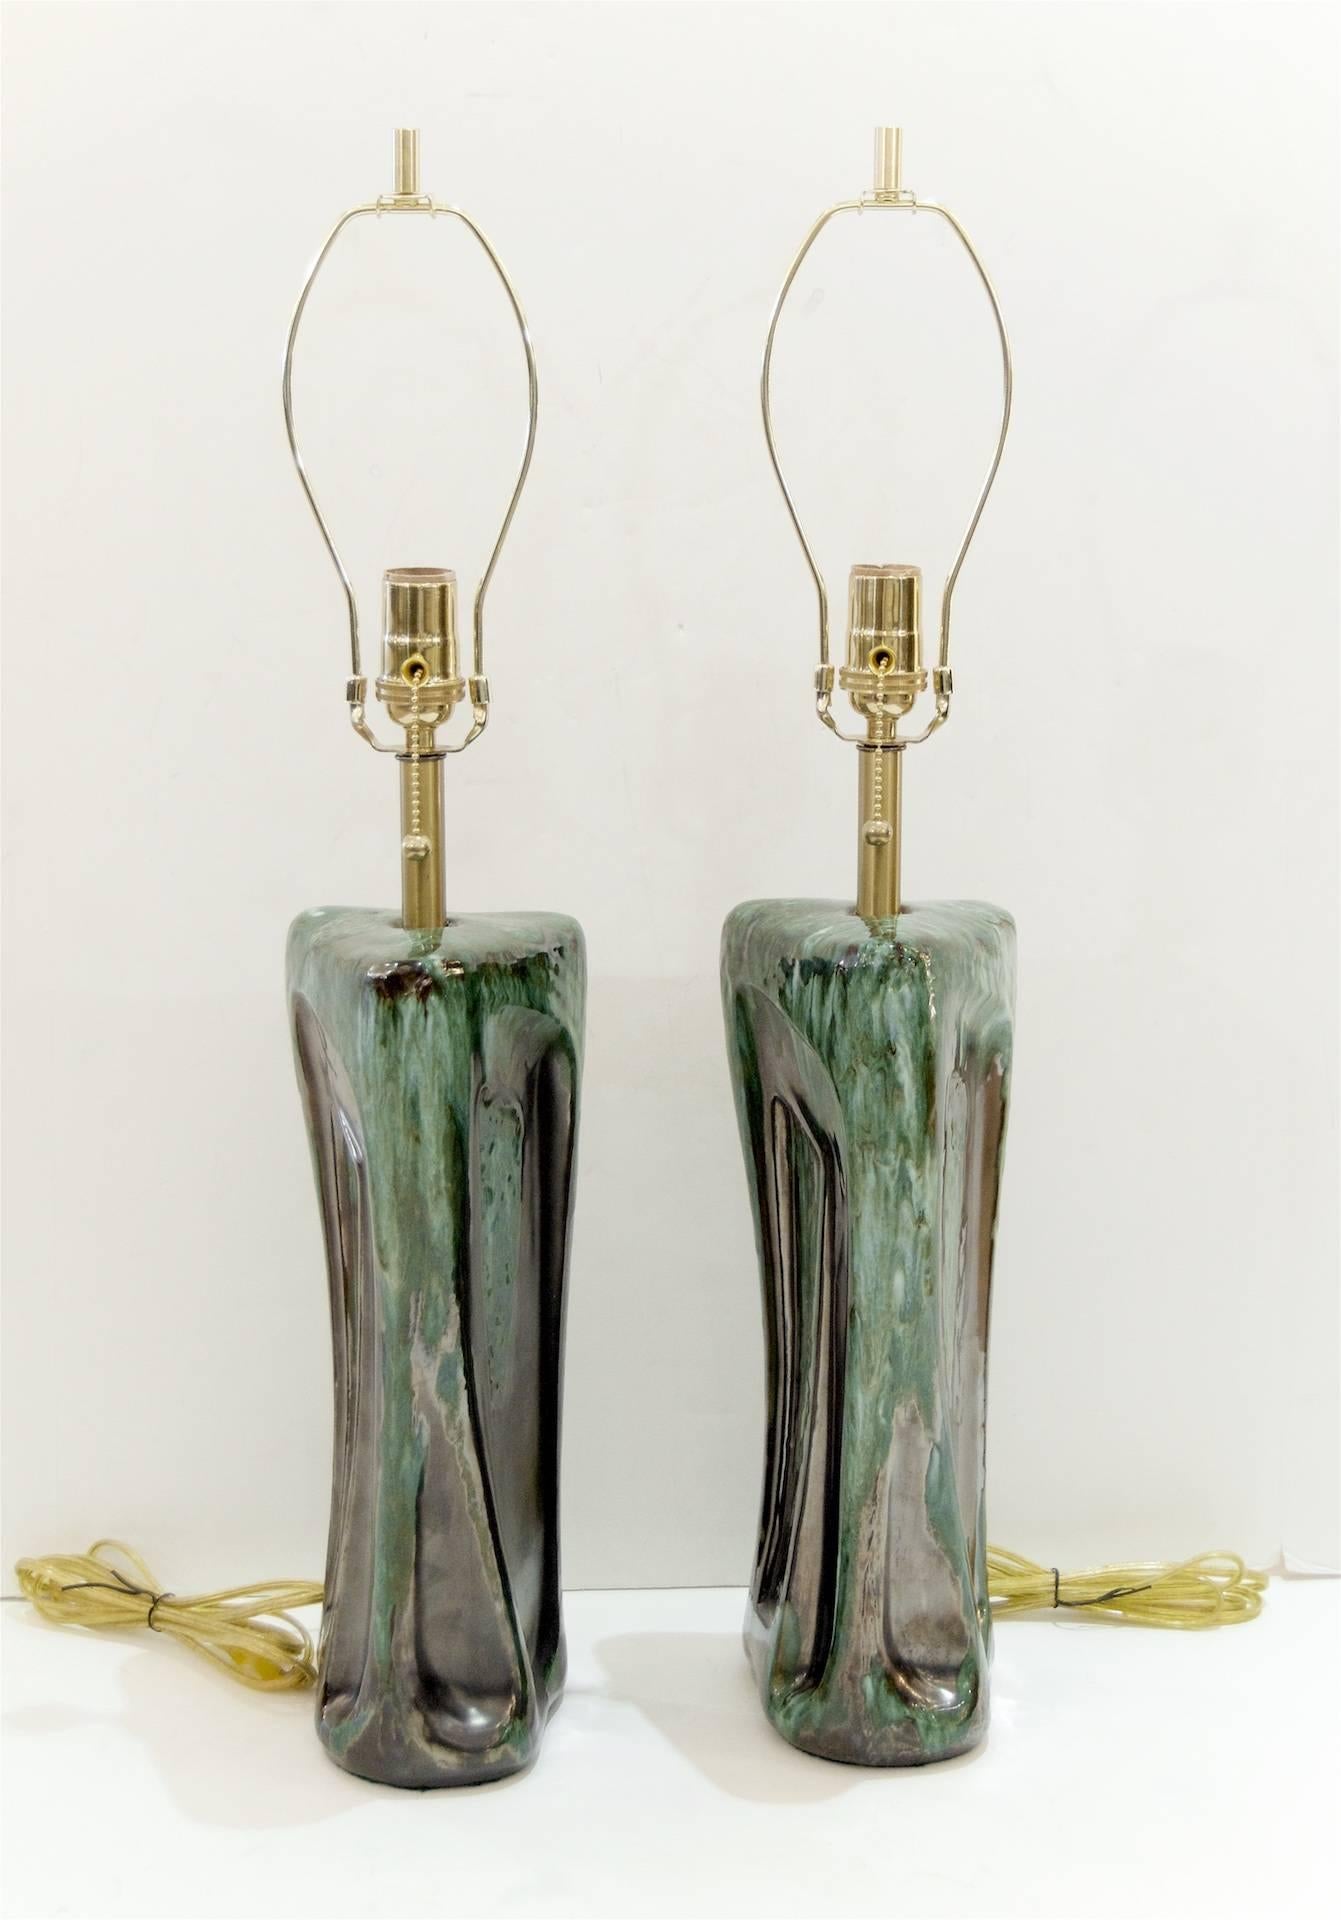 American Pair of Green and Graphite Glazed Table Lamps by Kroywen Ceramics